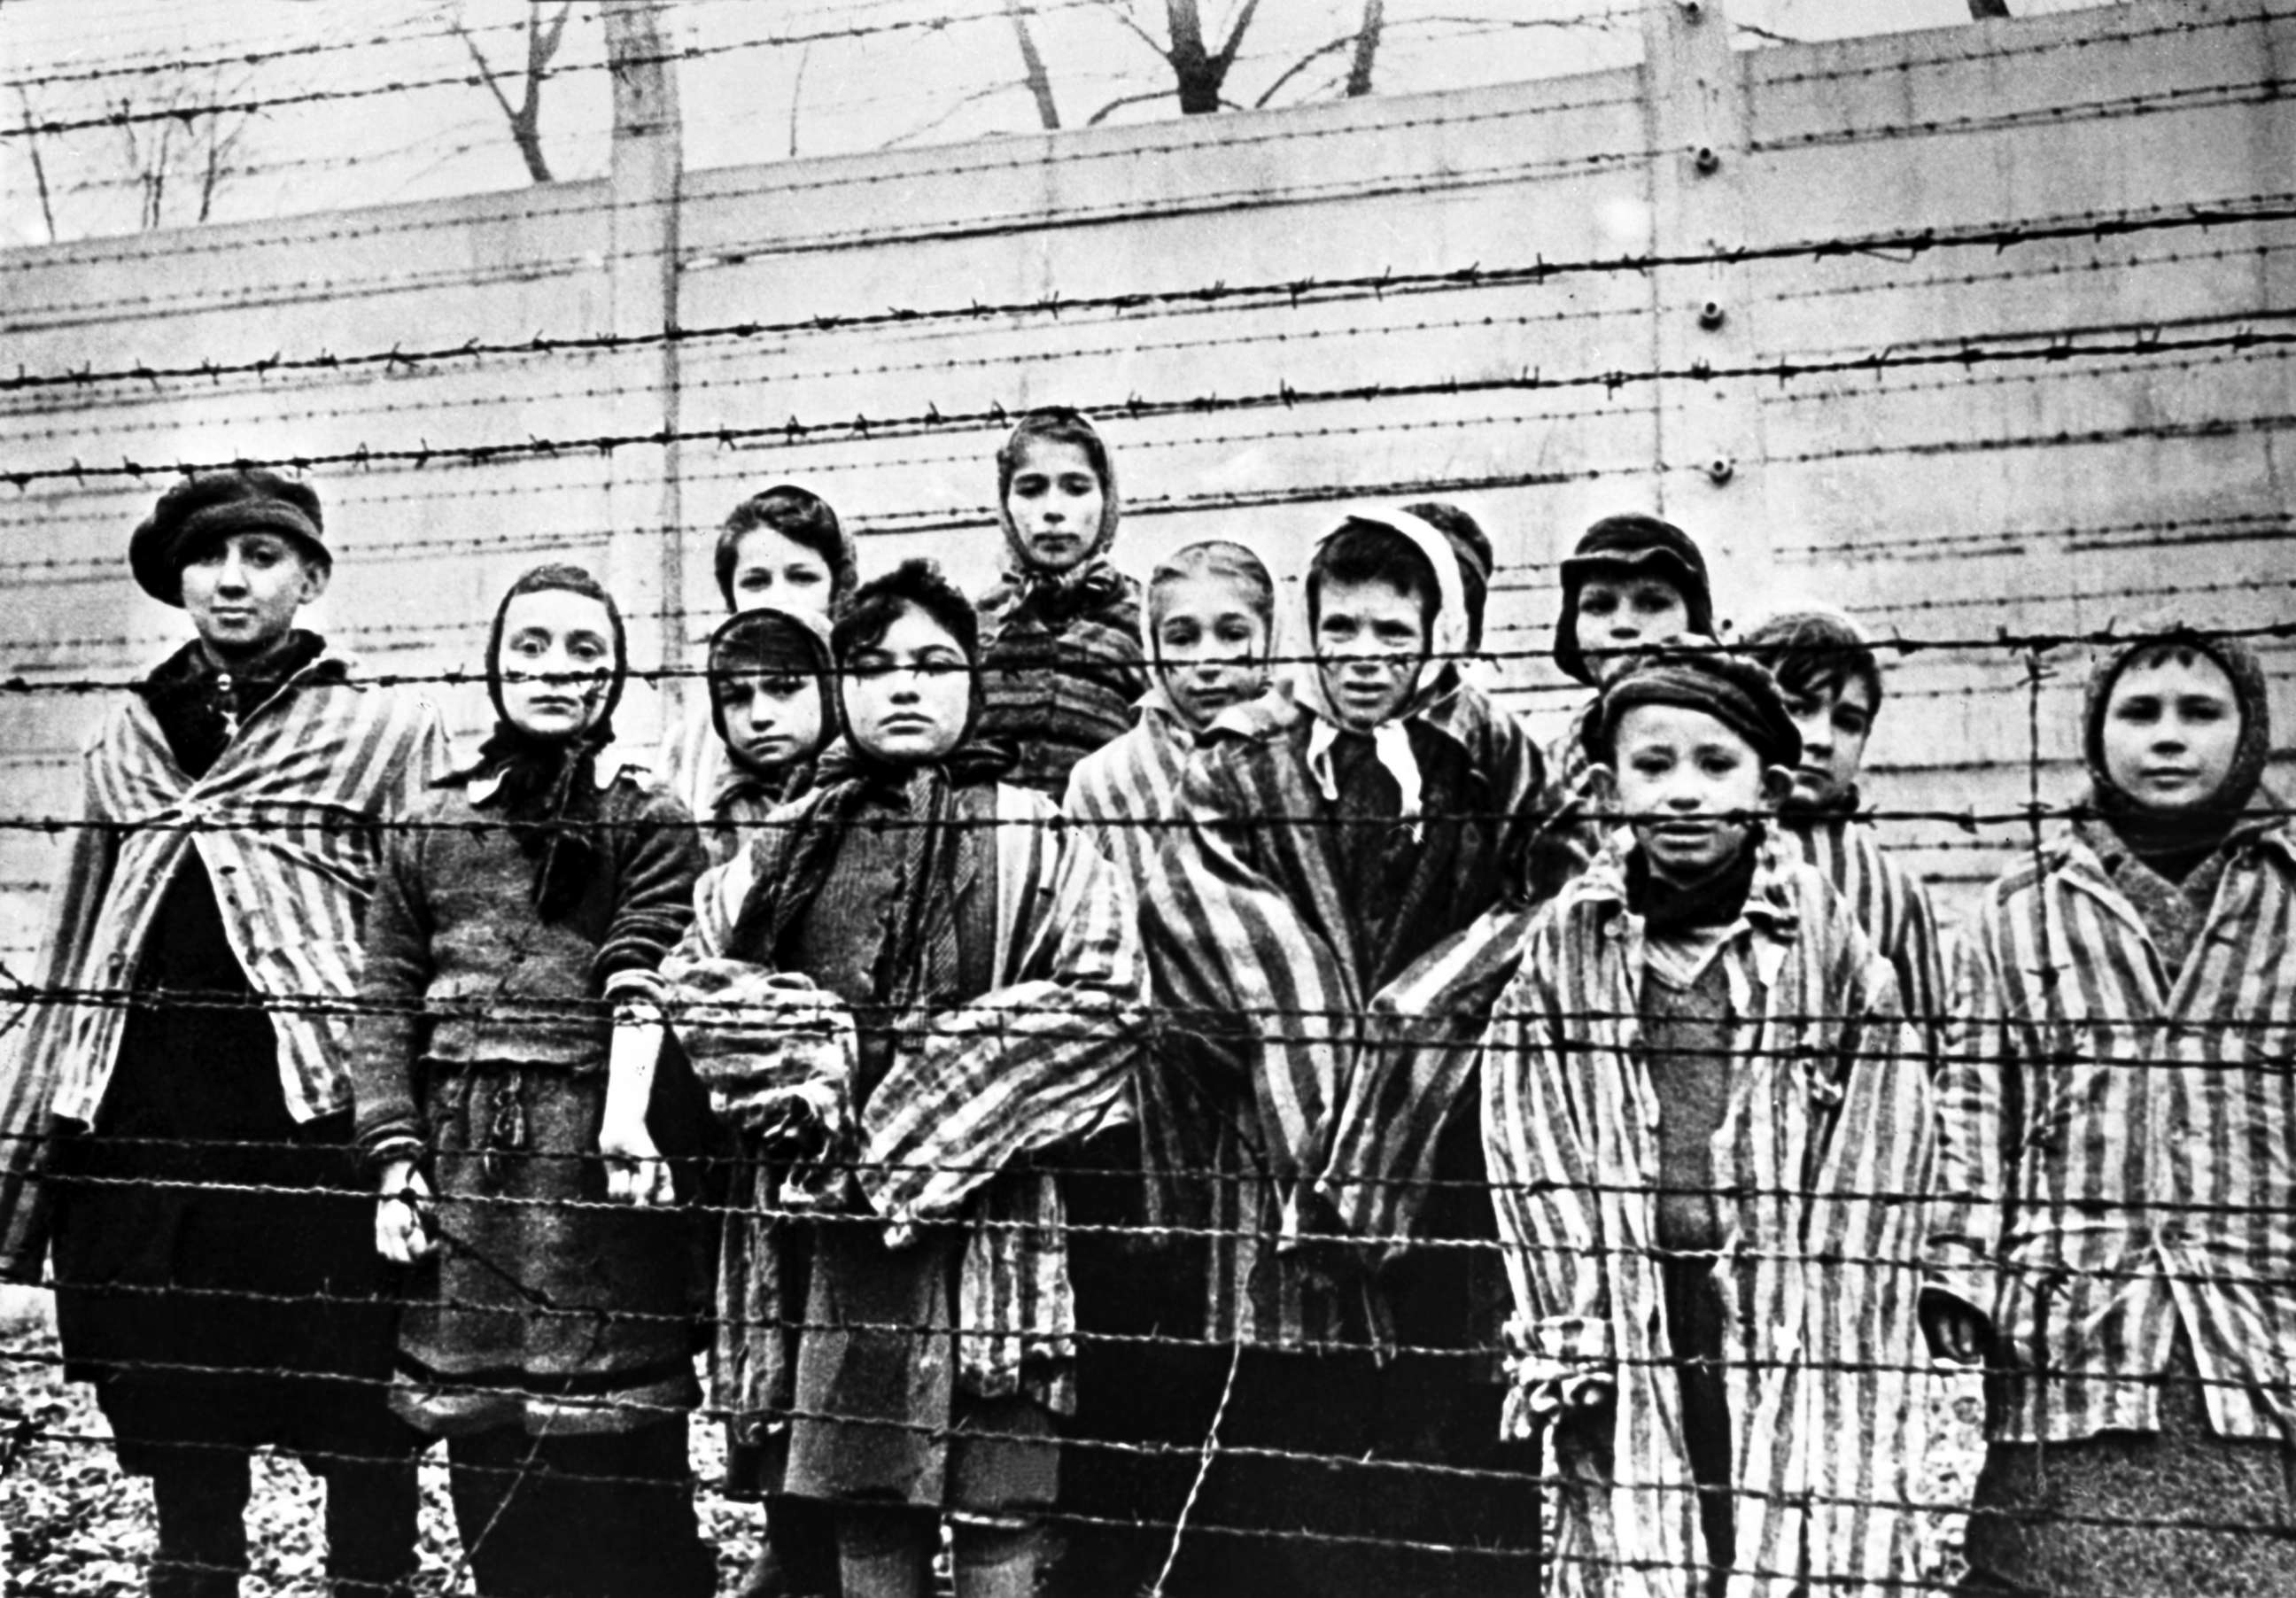 PHOTO: A group of child survivors stand behind a barbed wire fence at the Nazi concentration camp at Auschwitz-Birkenau in southern Poland, on the day of the camp's liberation by the Soviet Army, Jan. 27, 1945.